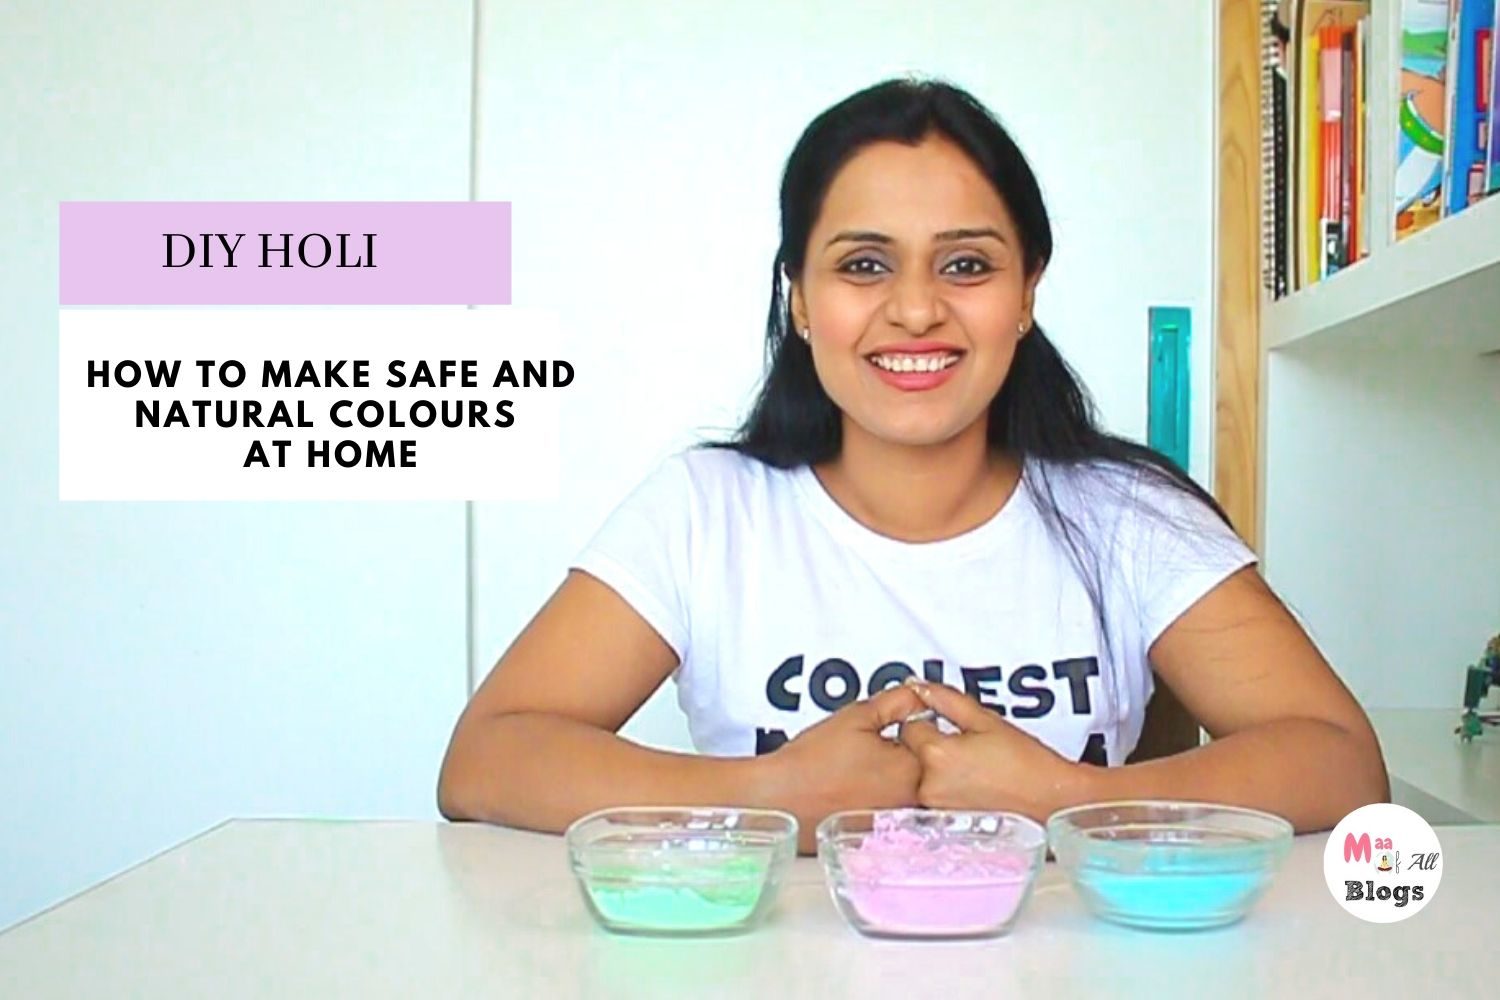 How To Make Safe And Natural Colours At Home - DIY HOLI COLOUR